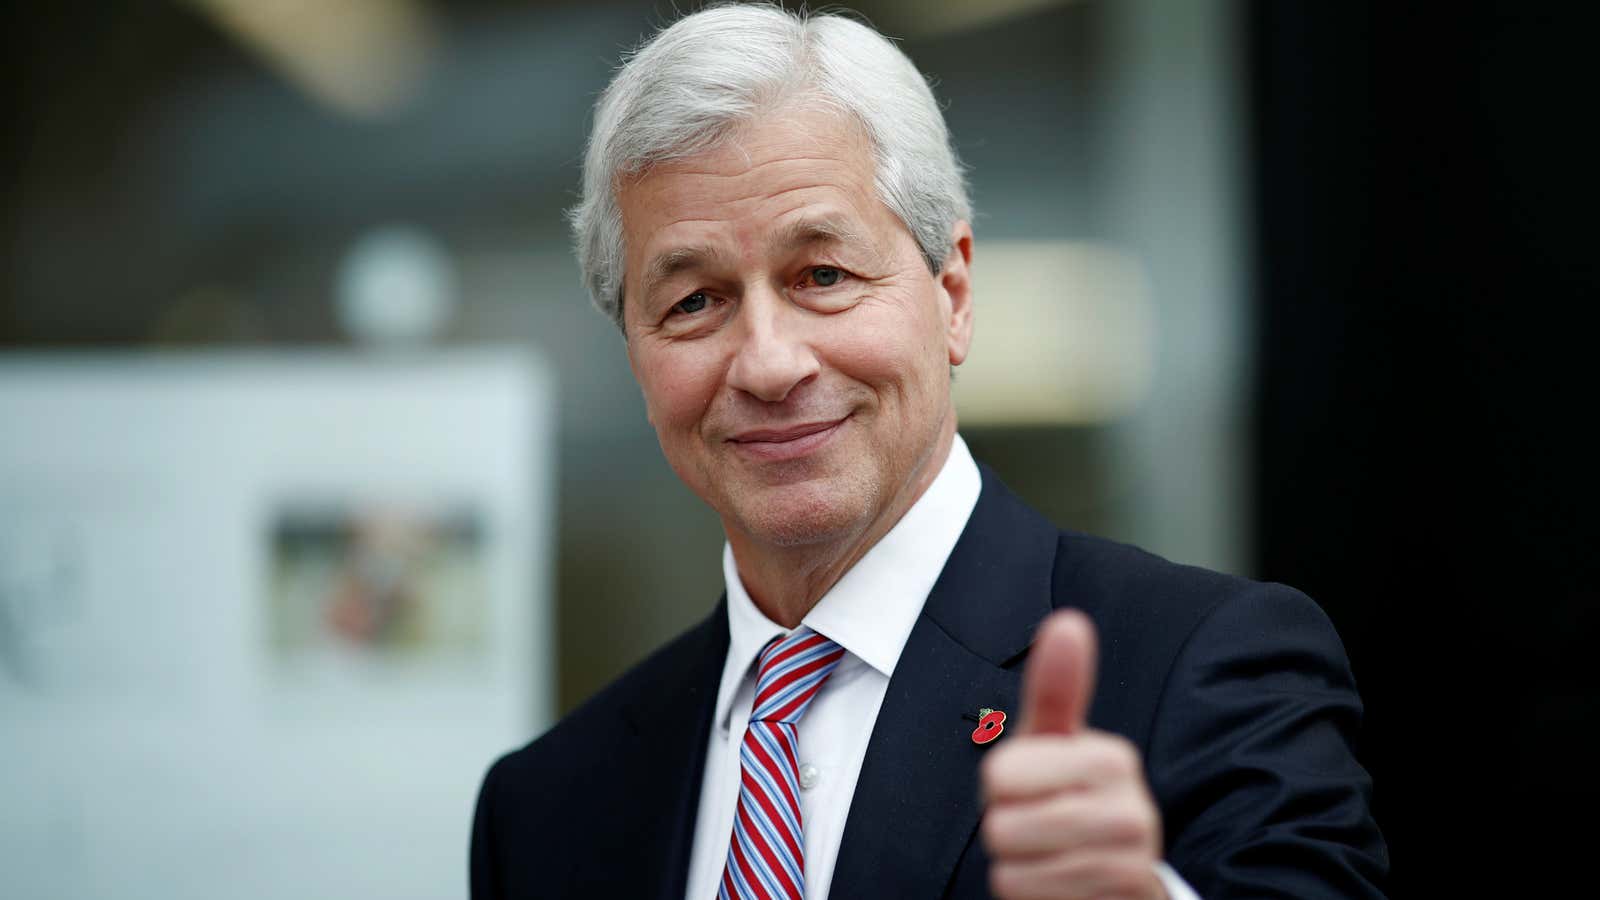 What does JPMorgan see in crypto now that it didn’t before?